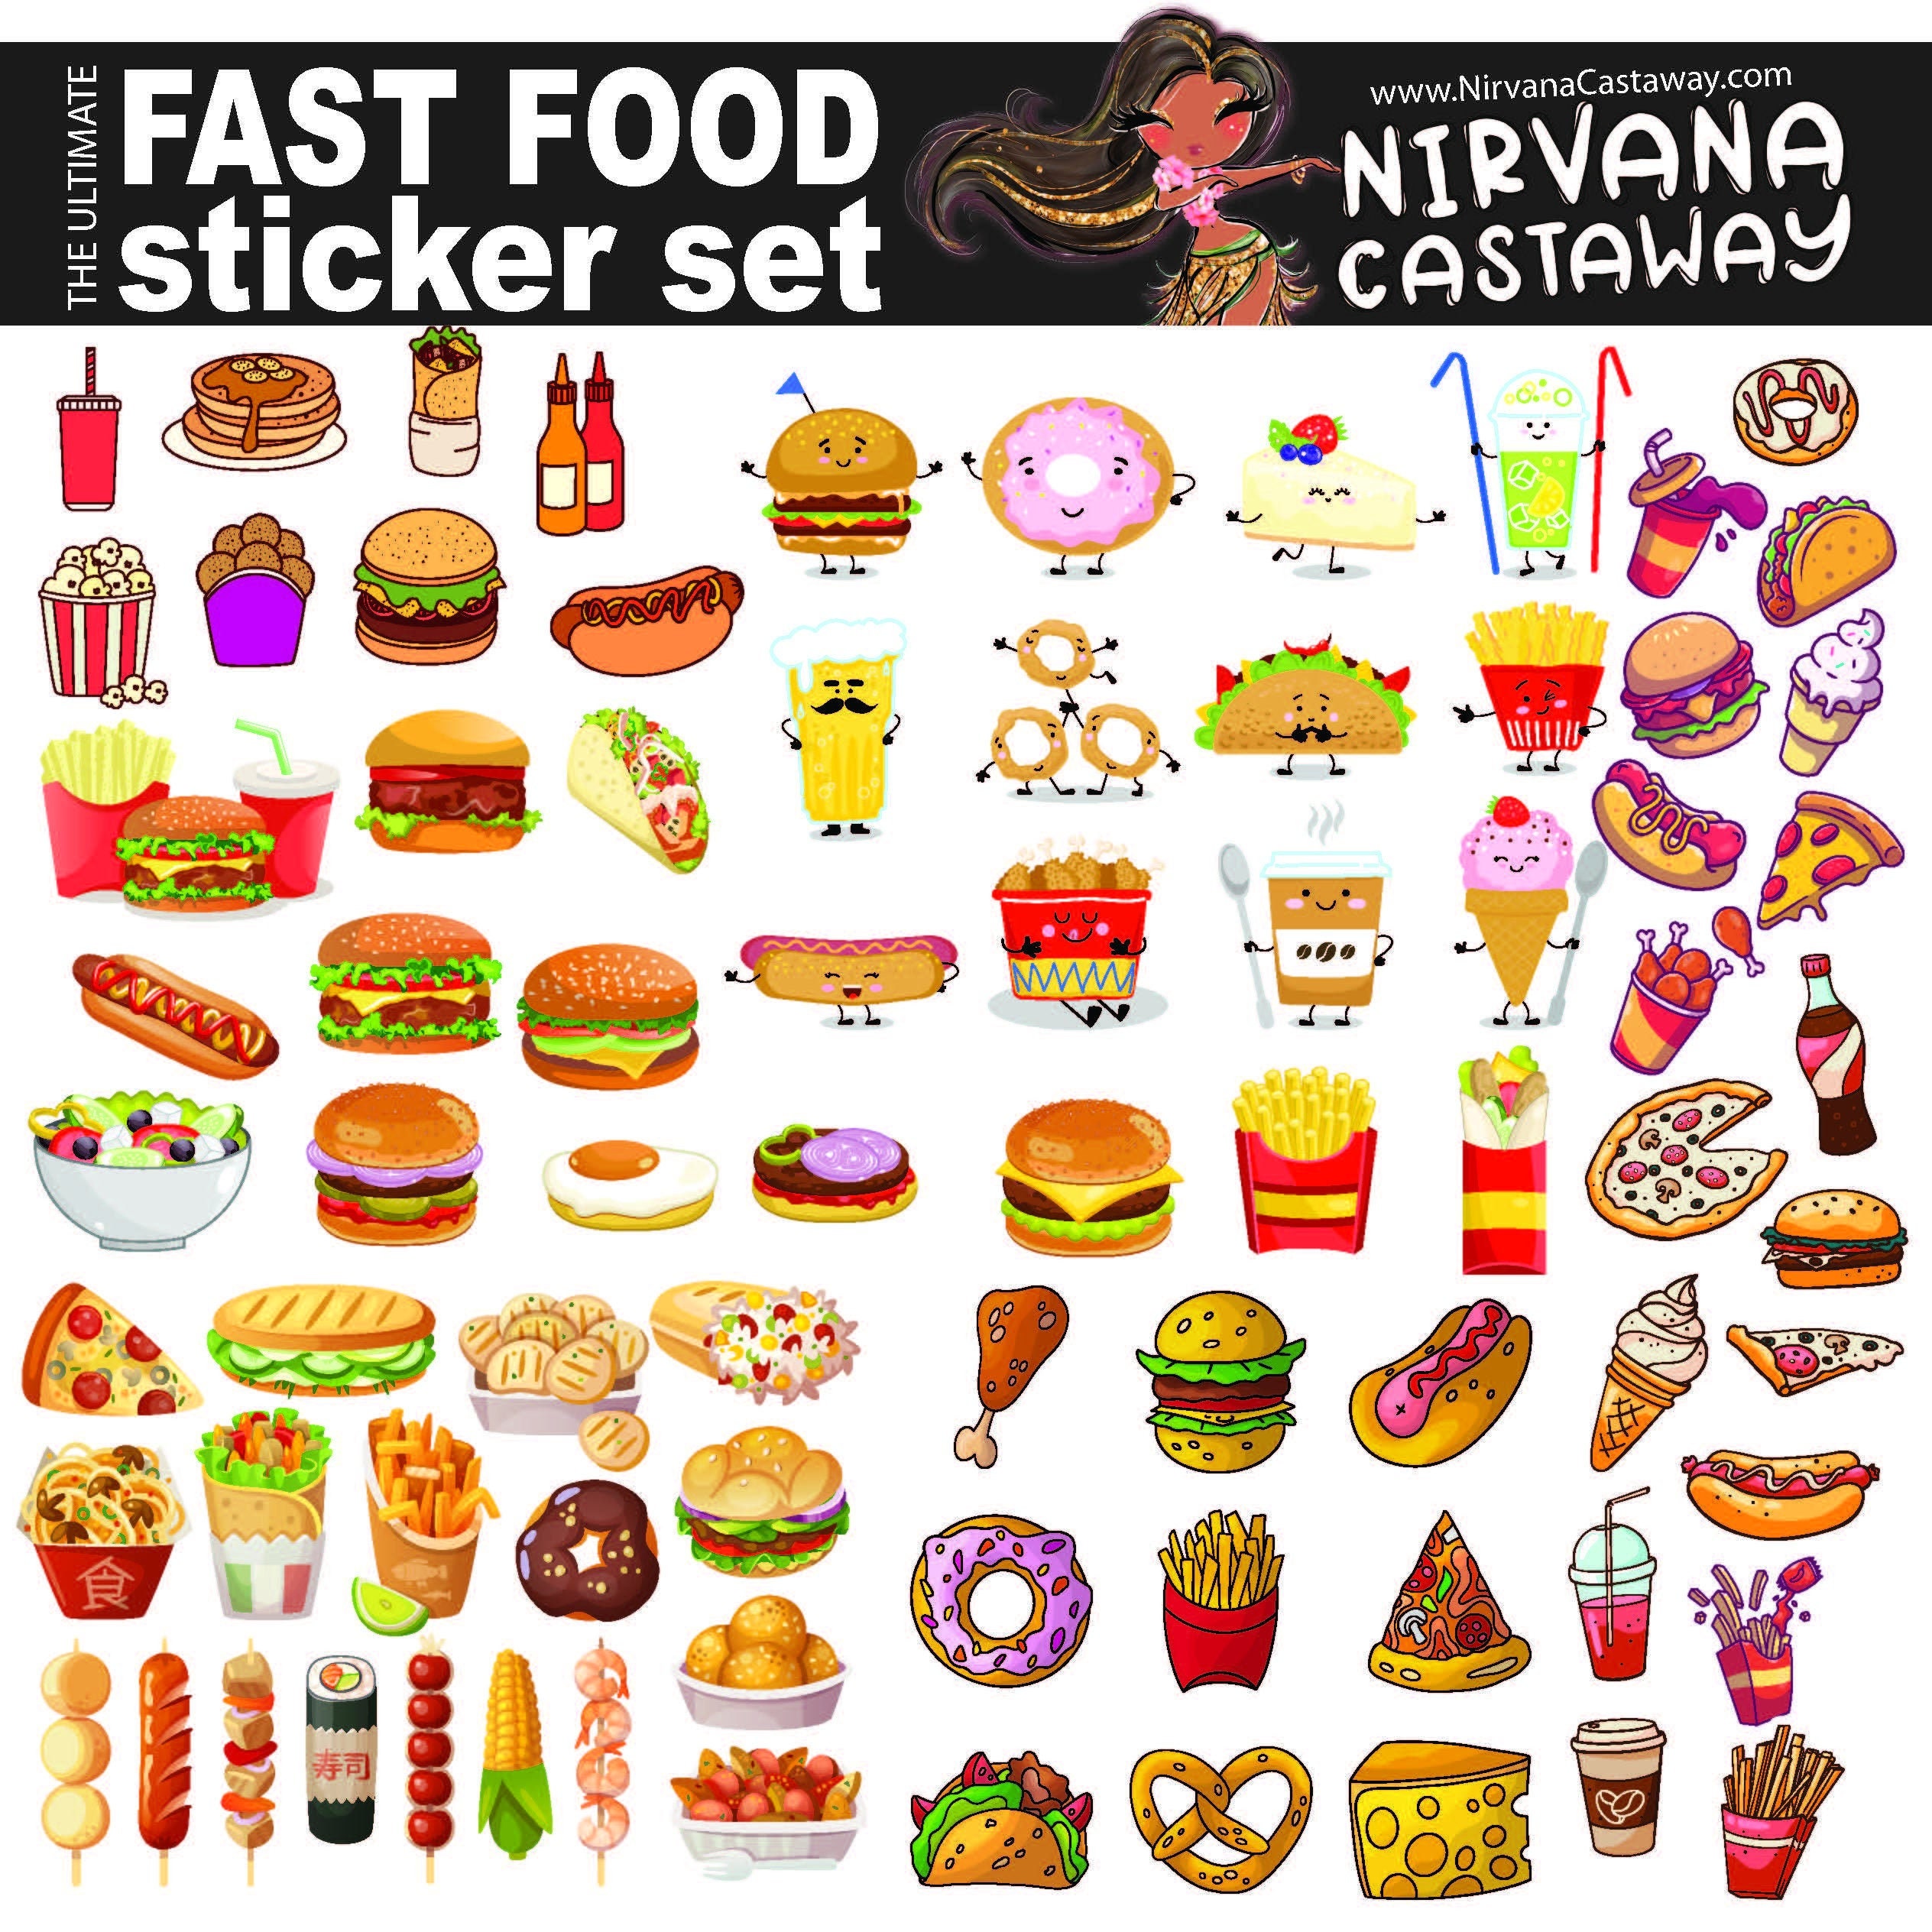 Fun Junk Food Stickers and Decal Sheets